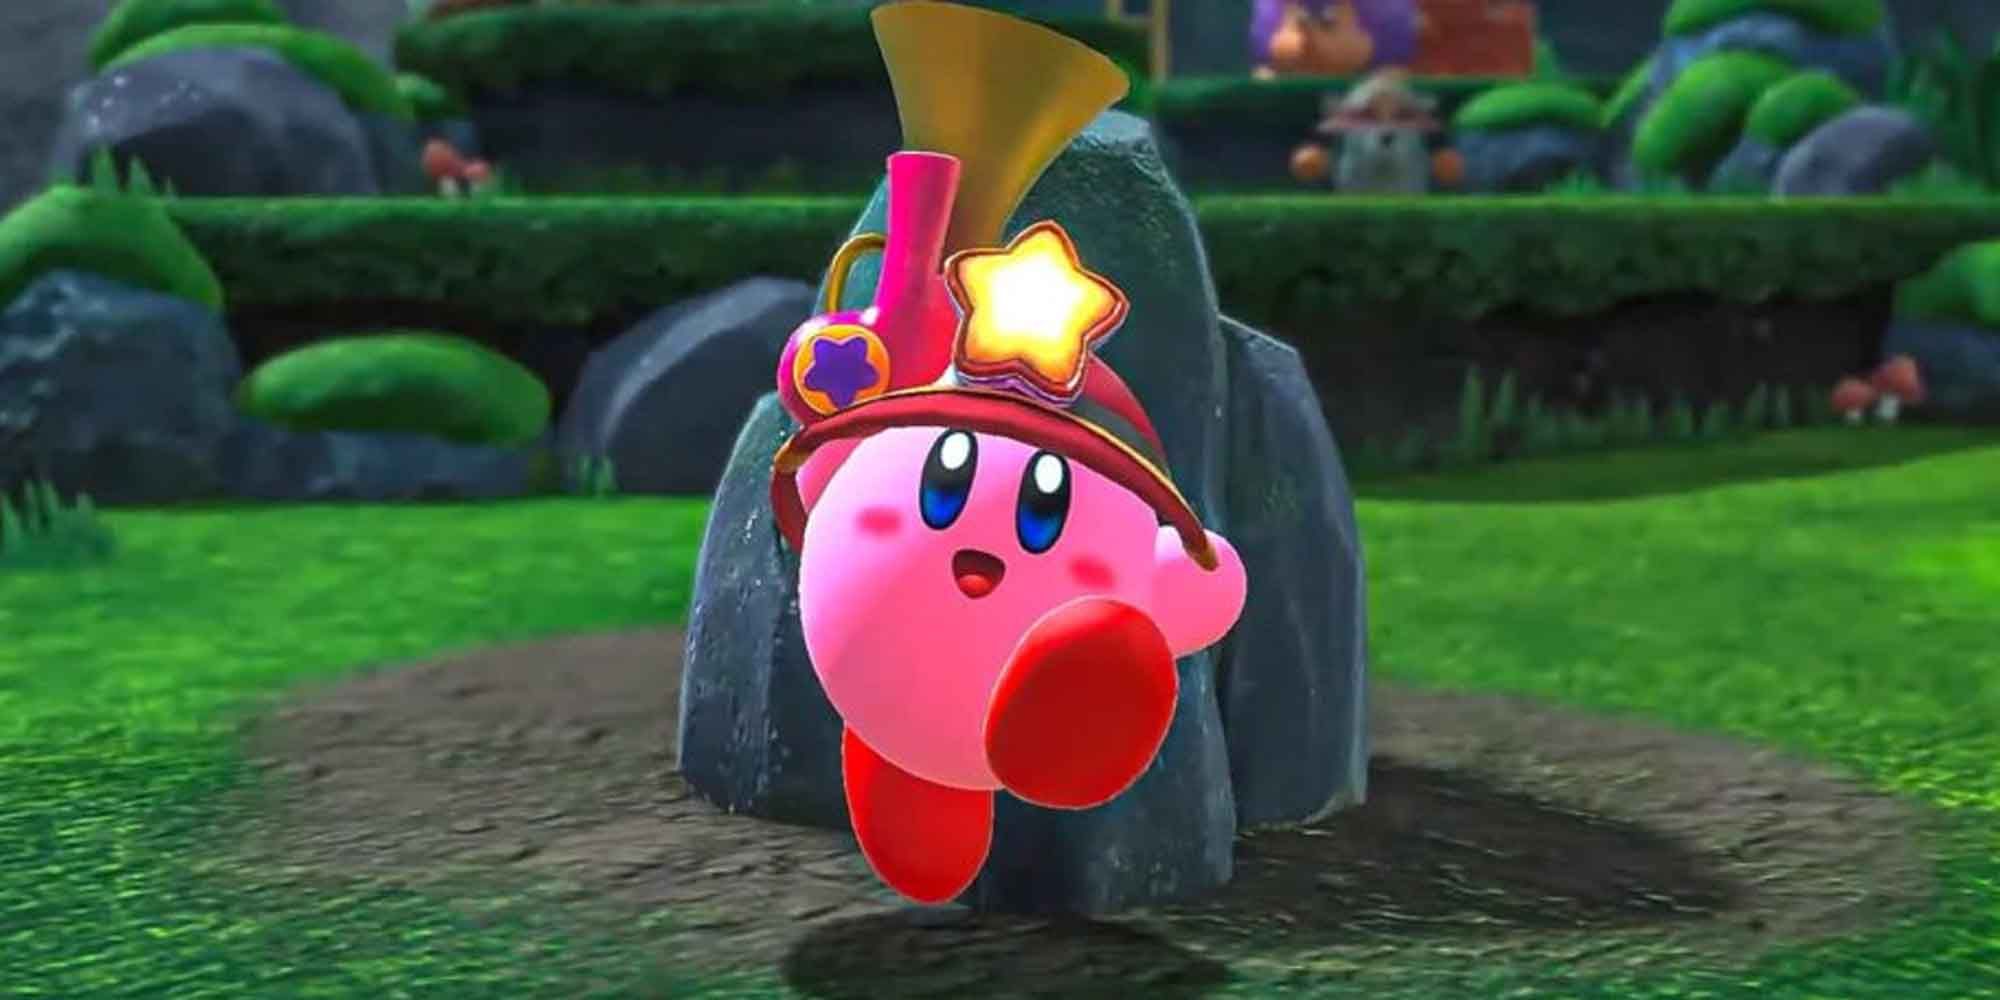 Using the Ranger copy ability in Kirby in The Forgotten Land